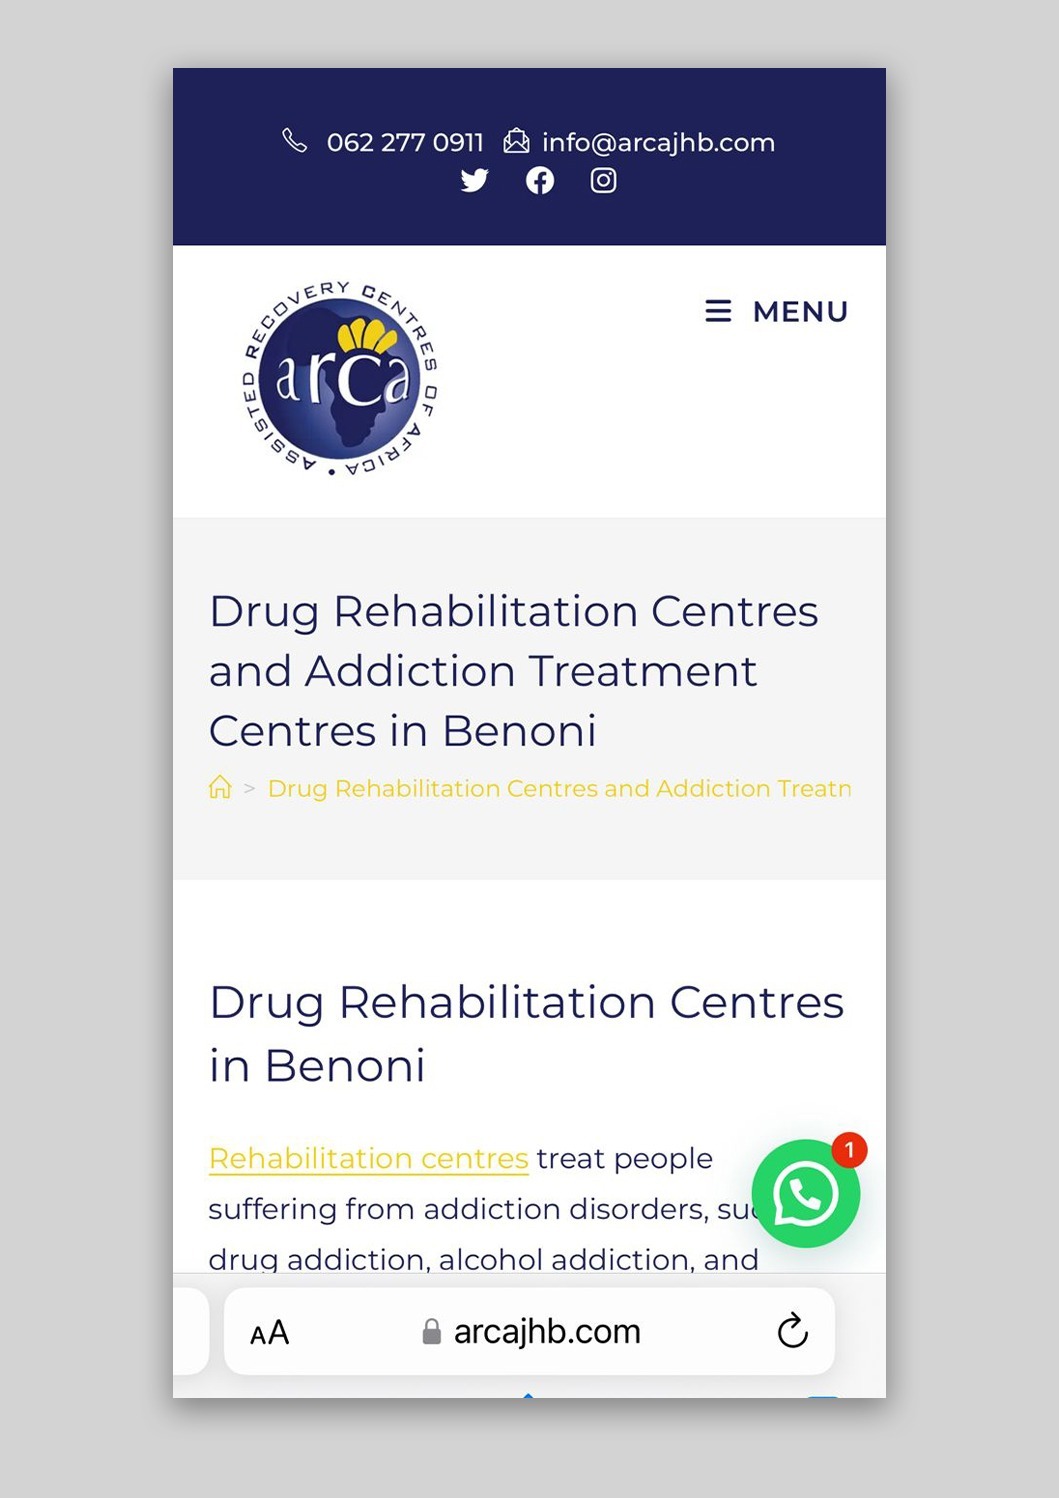 Screenshot of ARCA Johannesburg homepage featuring contact details and introductory information about their services in Benoni.